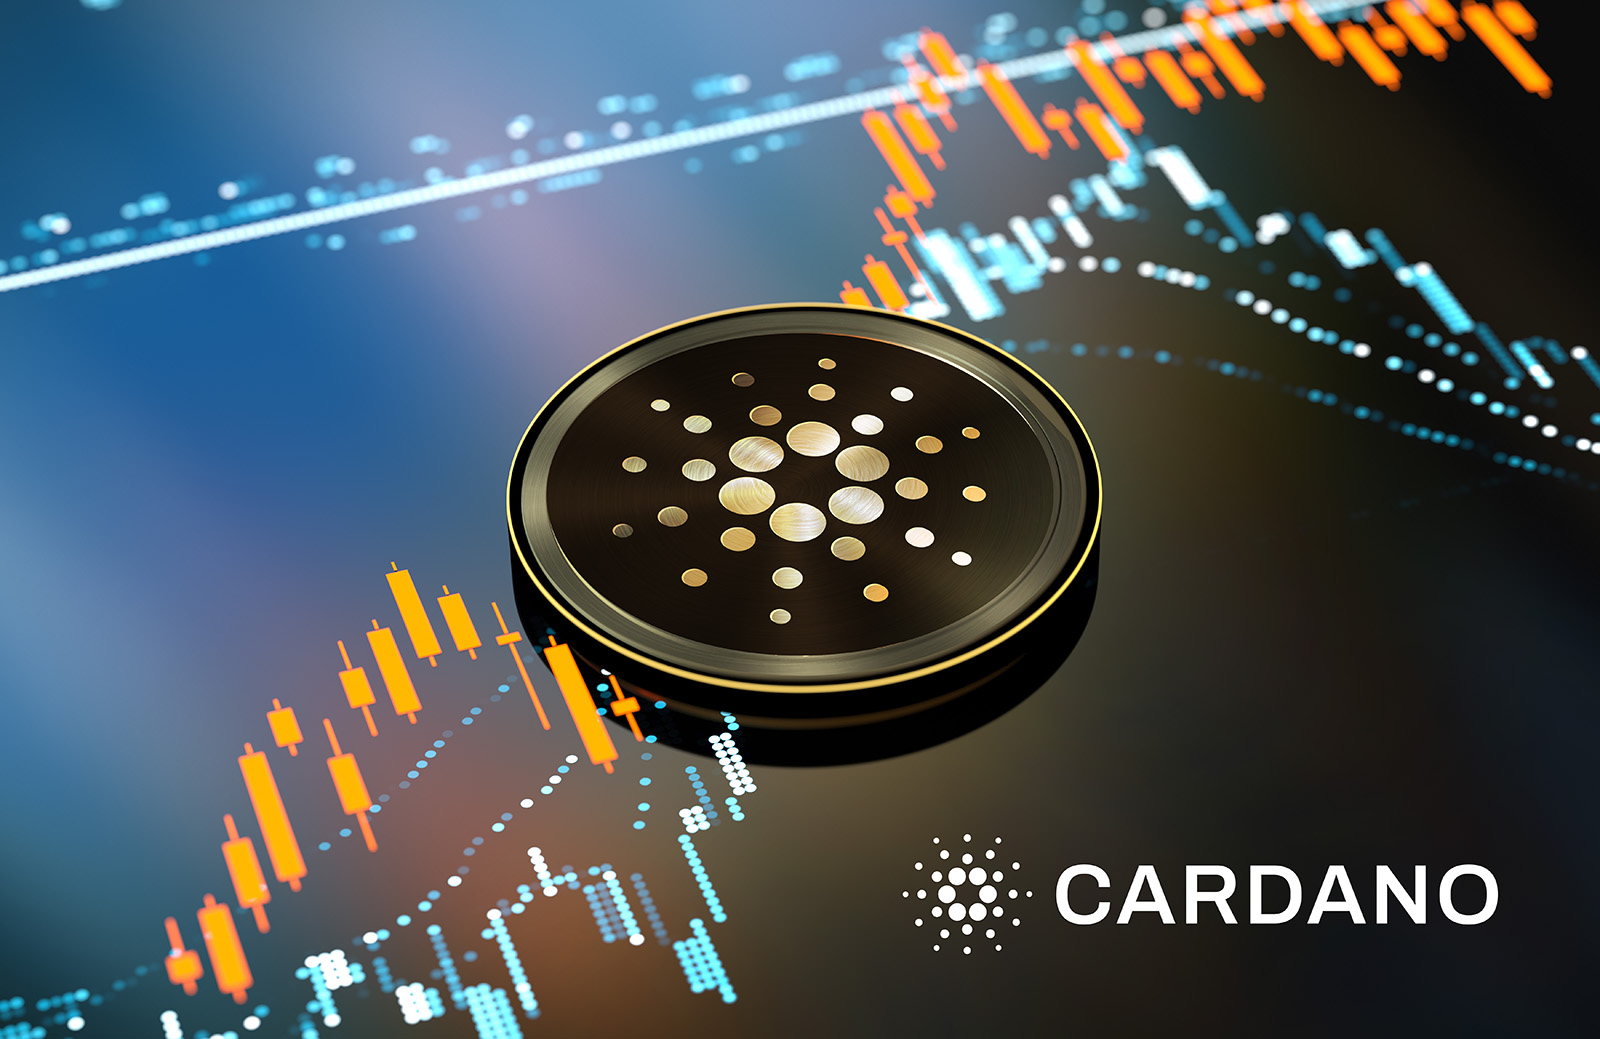 Cardano featured image - composite of crypto coin with dynamic background featured Image